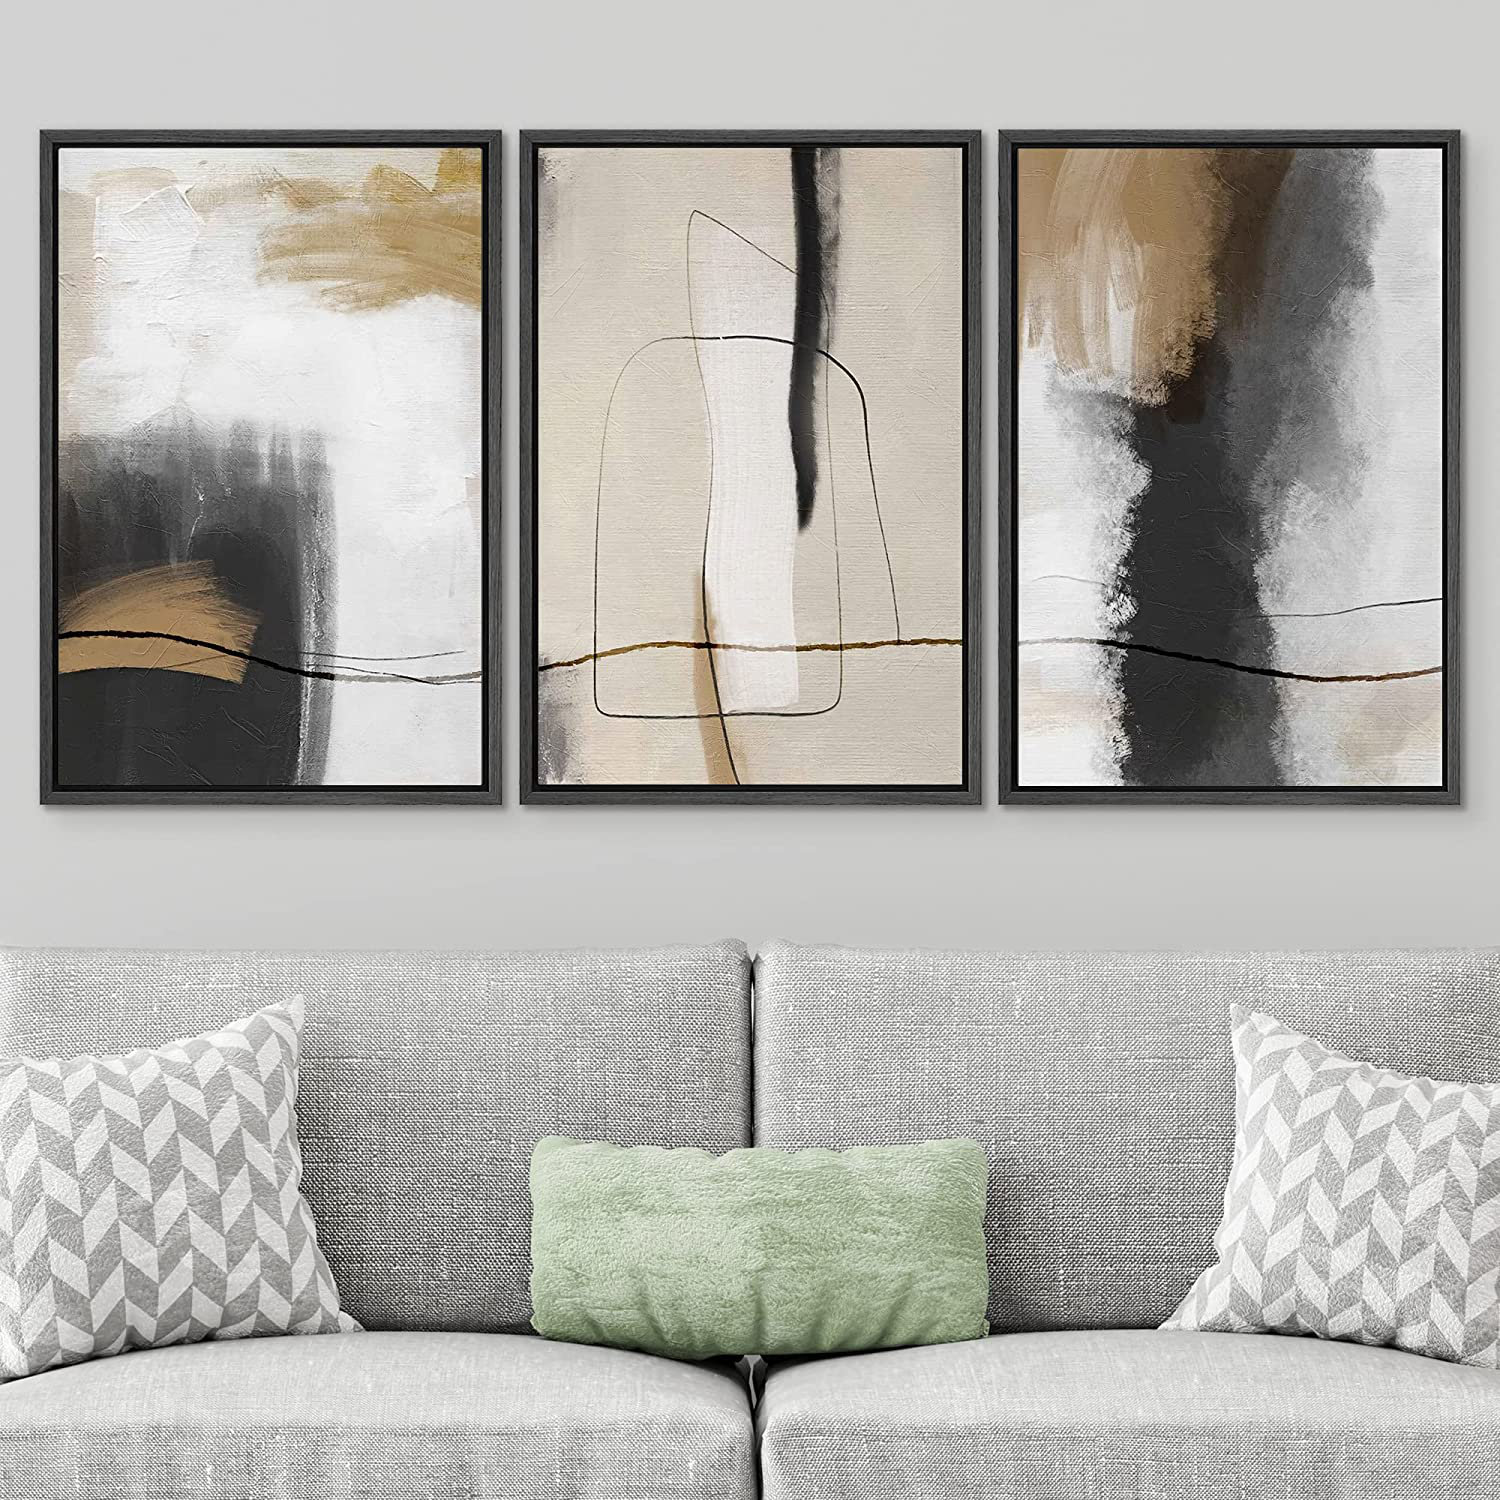 IDEA4WALL Framed Canvas Print Wall Art Set Geometric Line Brown Black  Pastel Color Field Abstract Shapes Illustrations Modern Art Decorative  Colorful For Living Room, Bedroom, Office Framed On Canvas Pieces Print